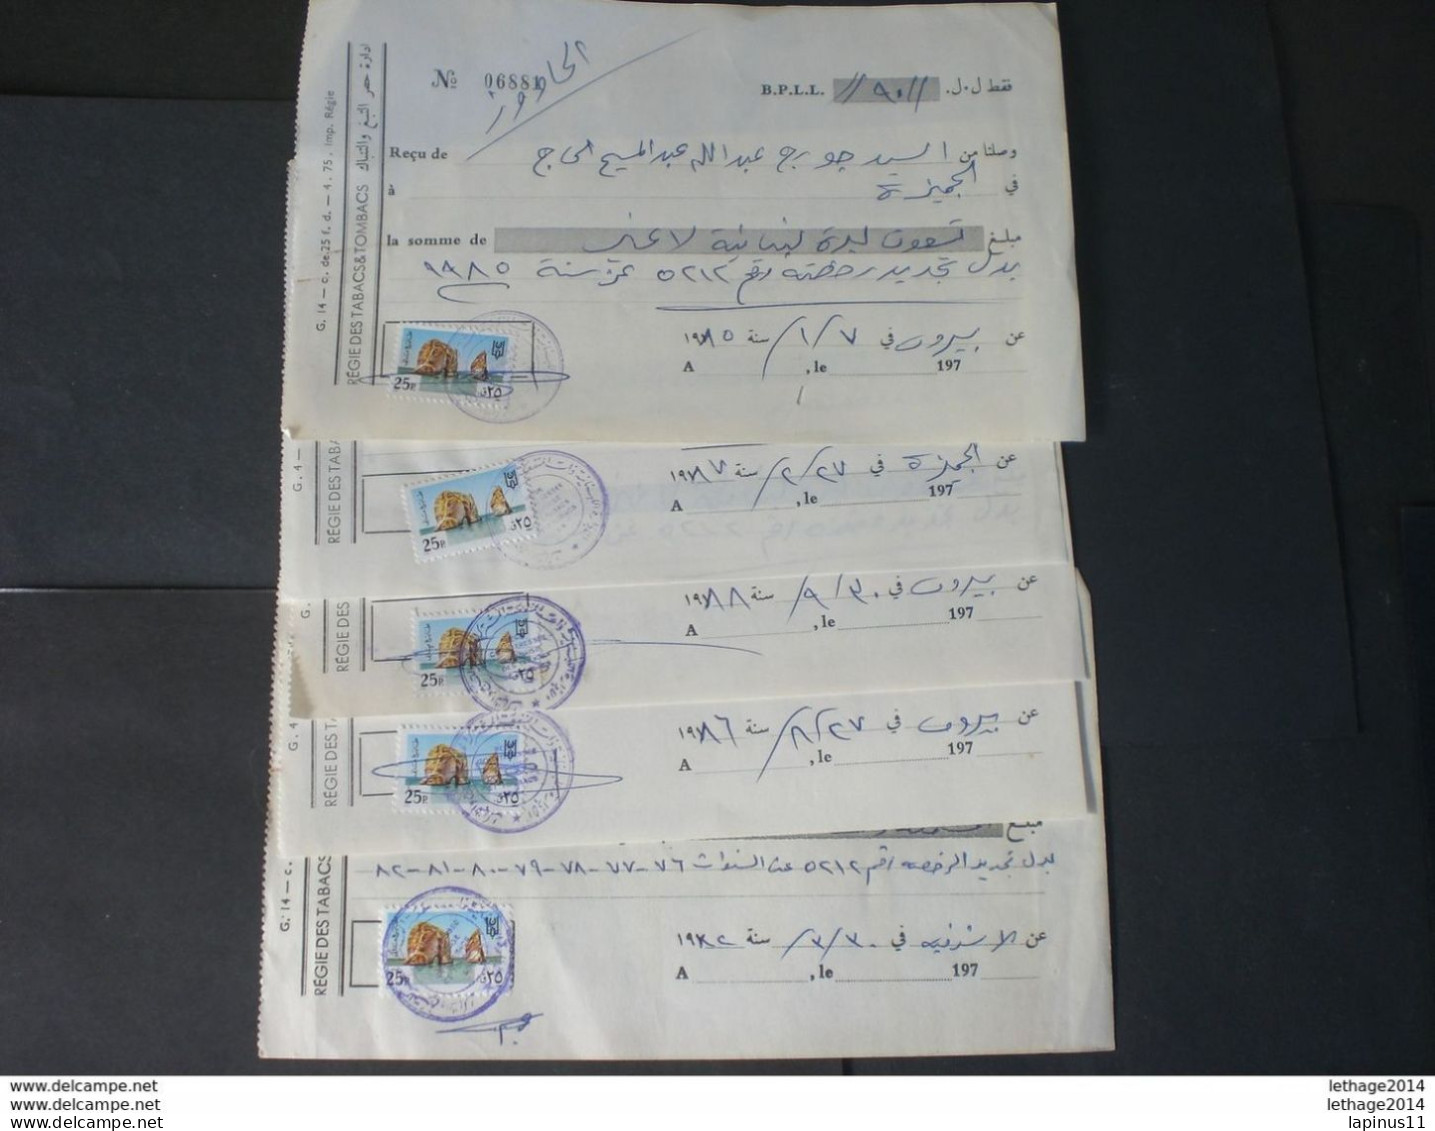 LEBANON لبنان GRAND LIBAN STAMPS TAXE TAX FISCAL REVENUE ORIGINAL NUMBER 88 DOCUMENT + 7 PHOTO - Libano